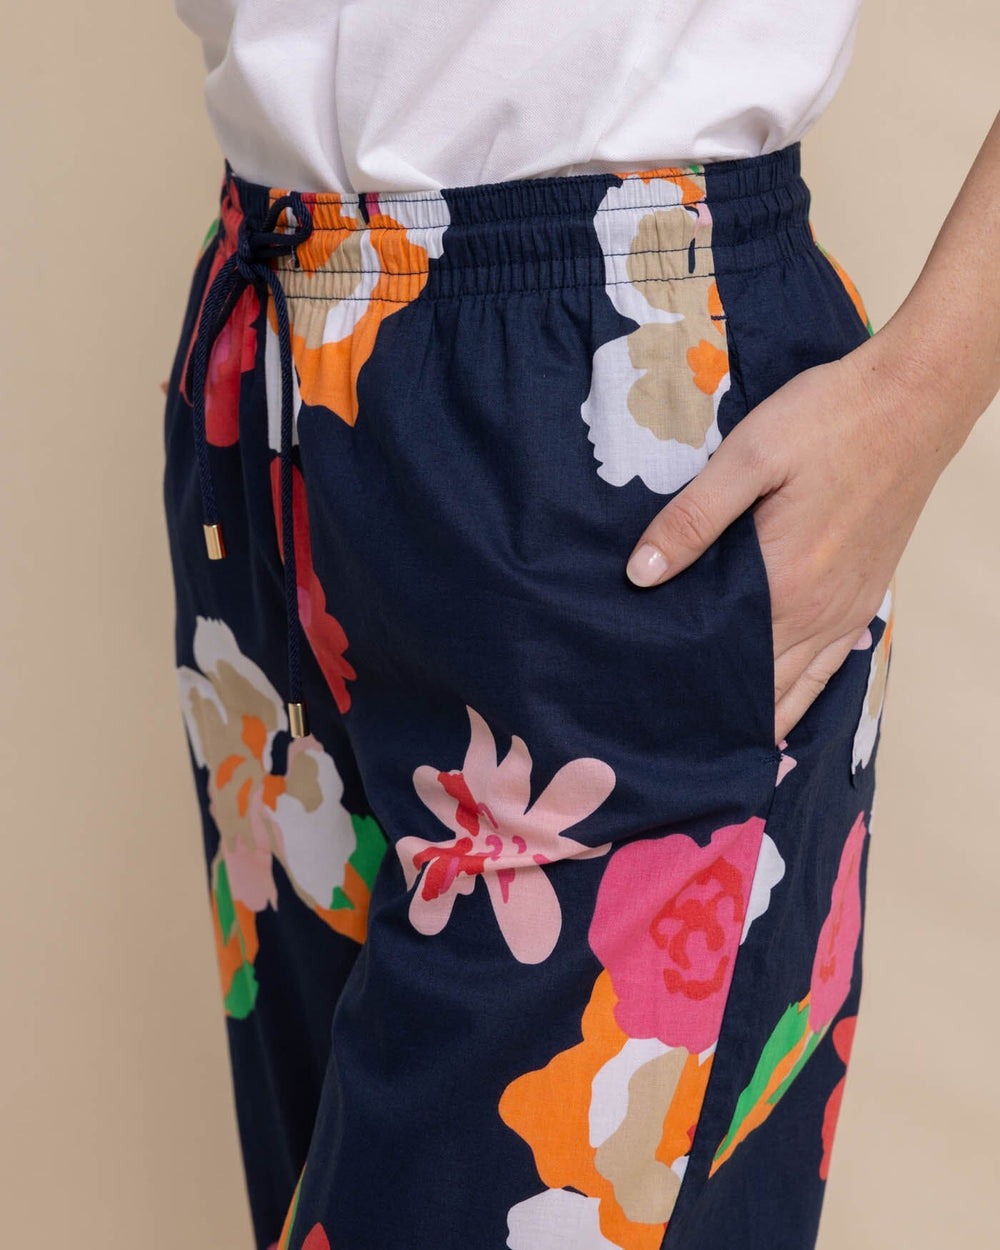 The detail view of the Southern Tide Alain Garden Splendor Pant by Southern Tide - Dress Blue